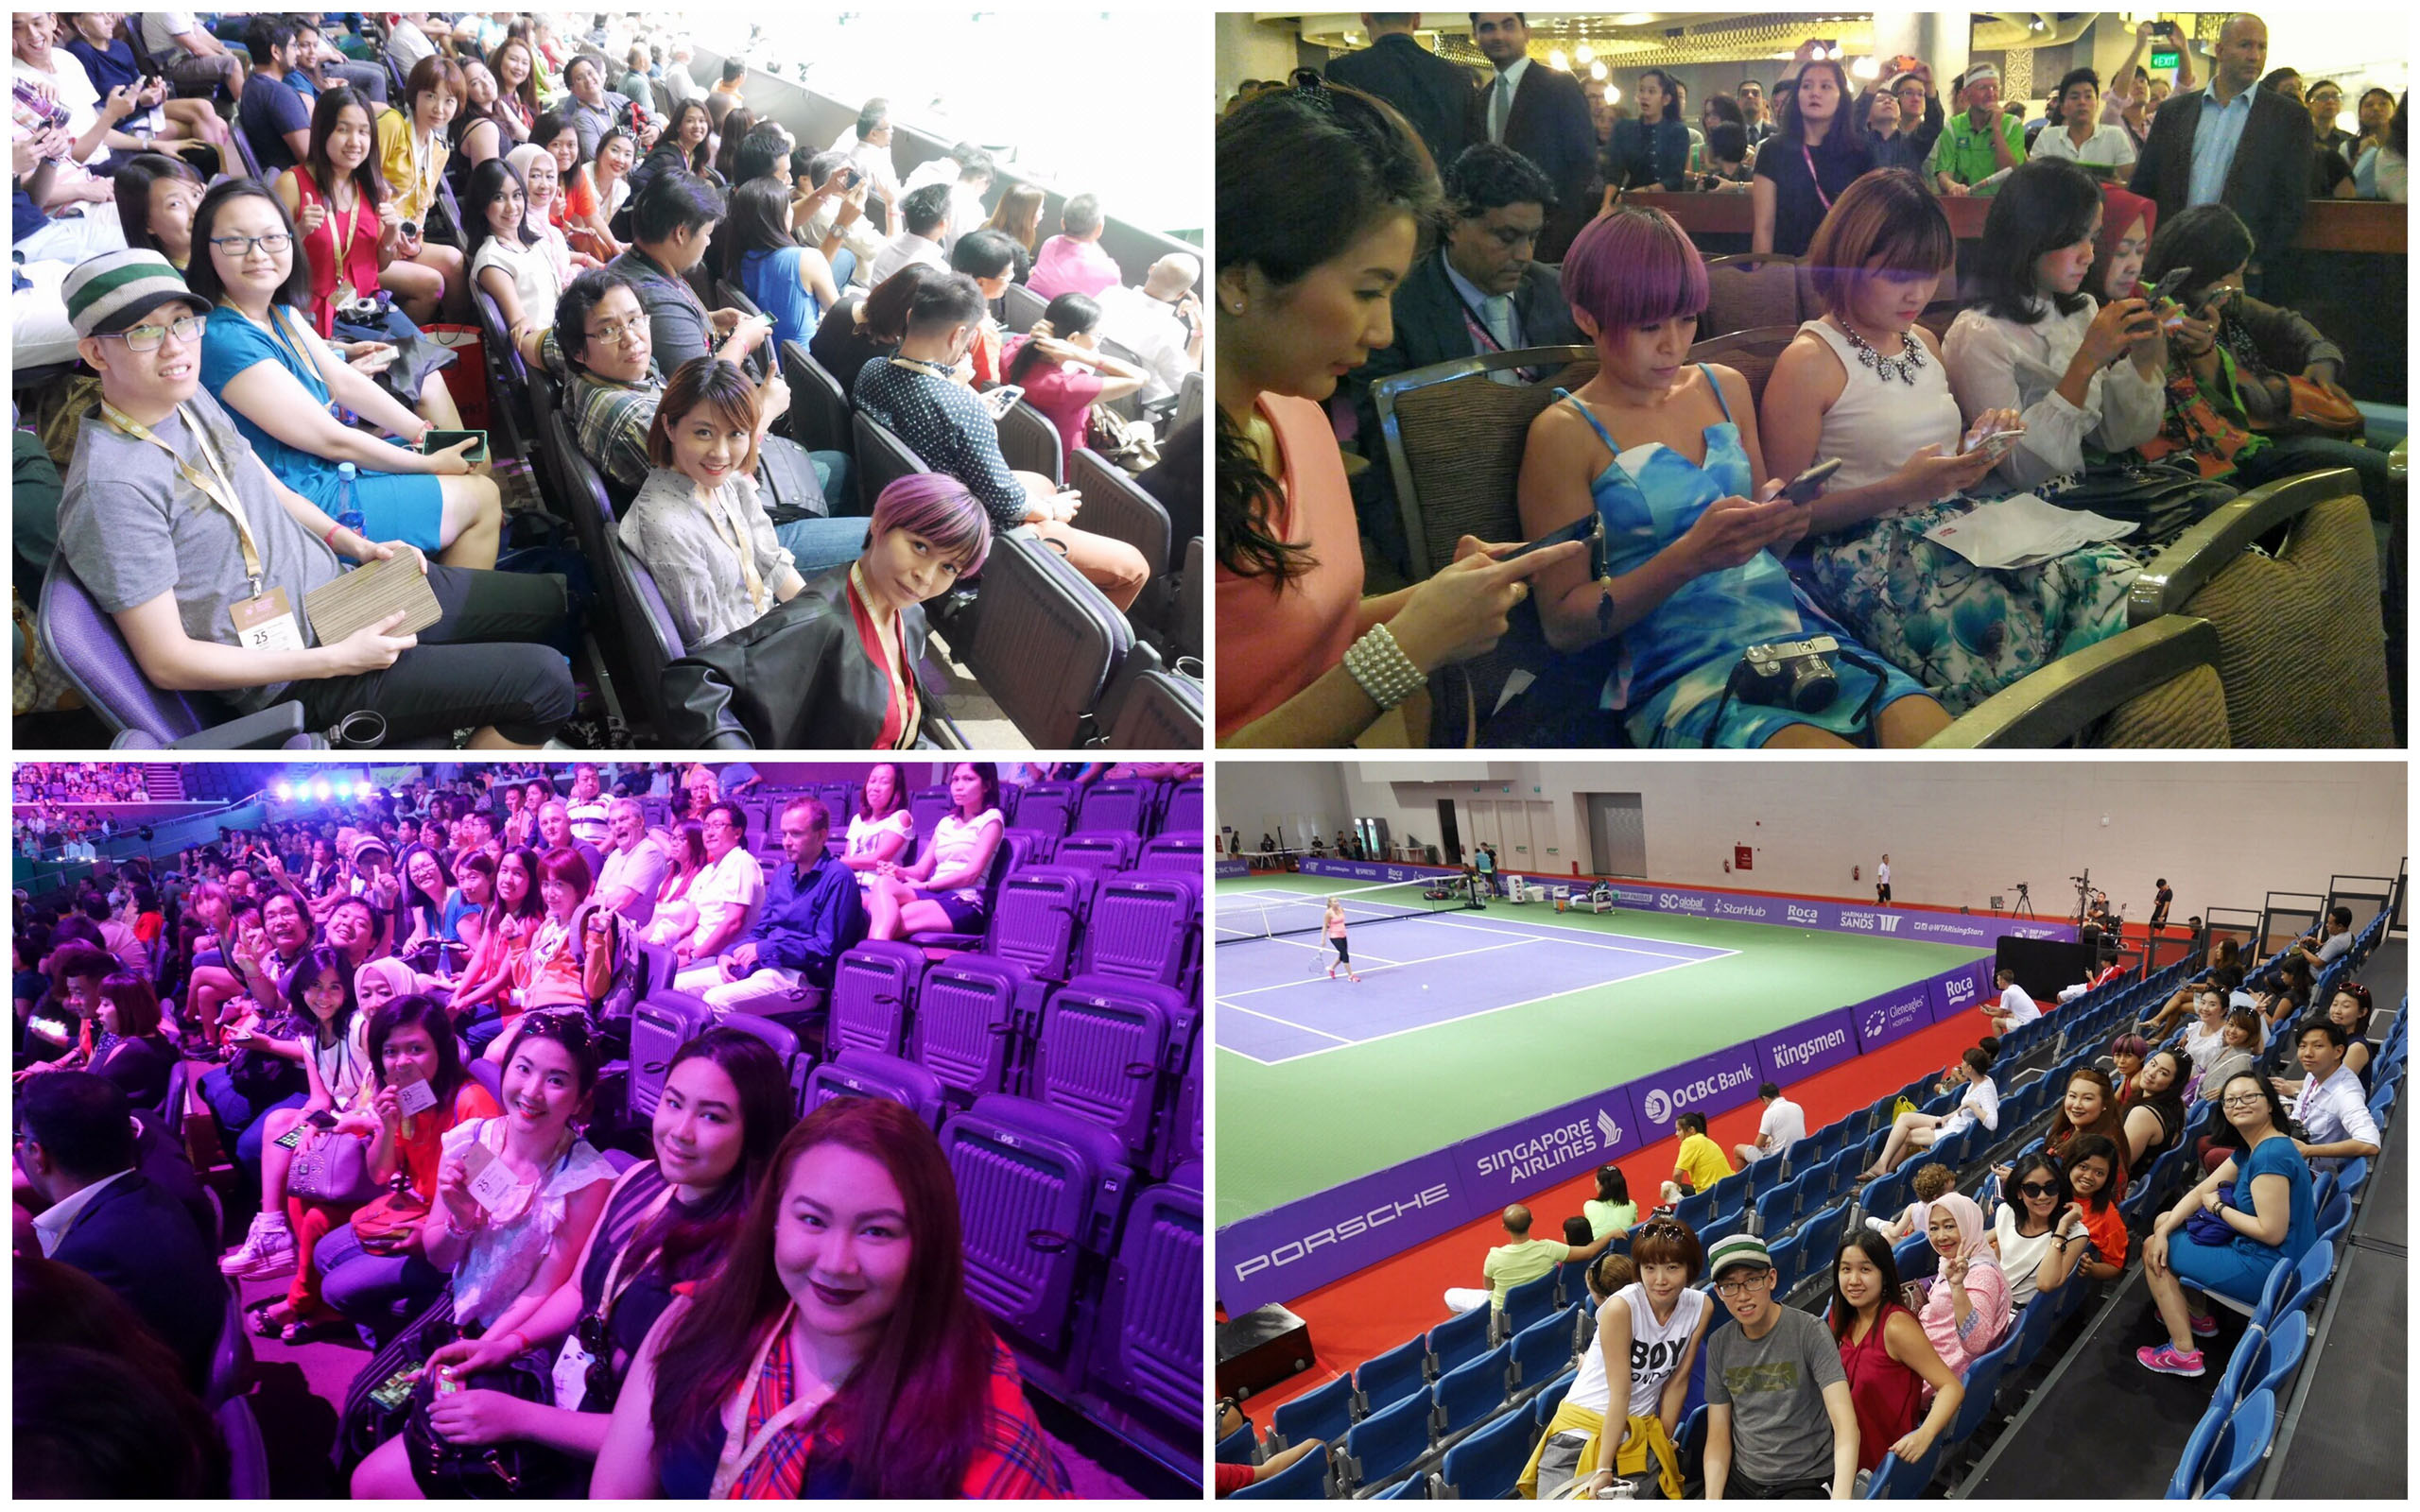 Had Fun with the other bloggers at WTA Finals Singapore